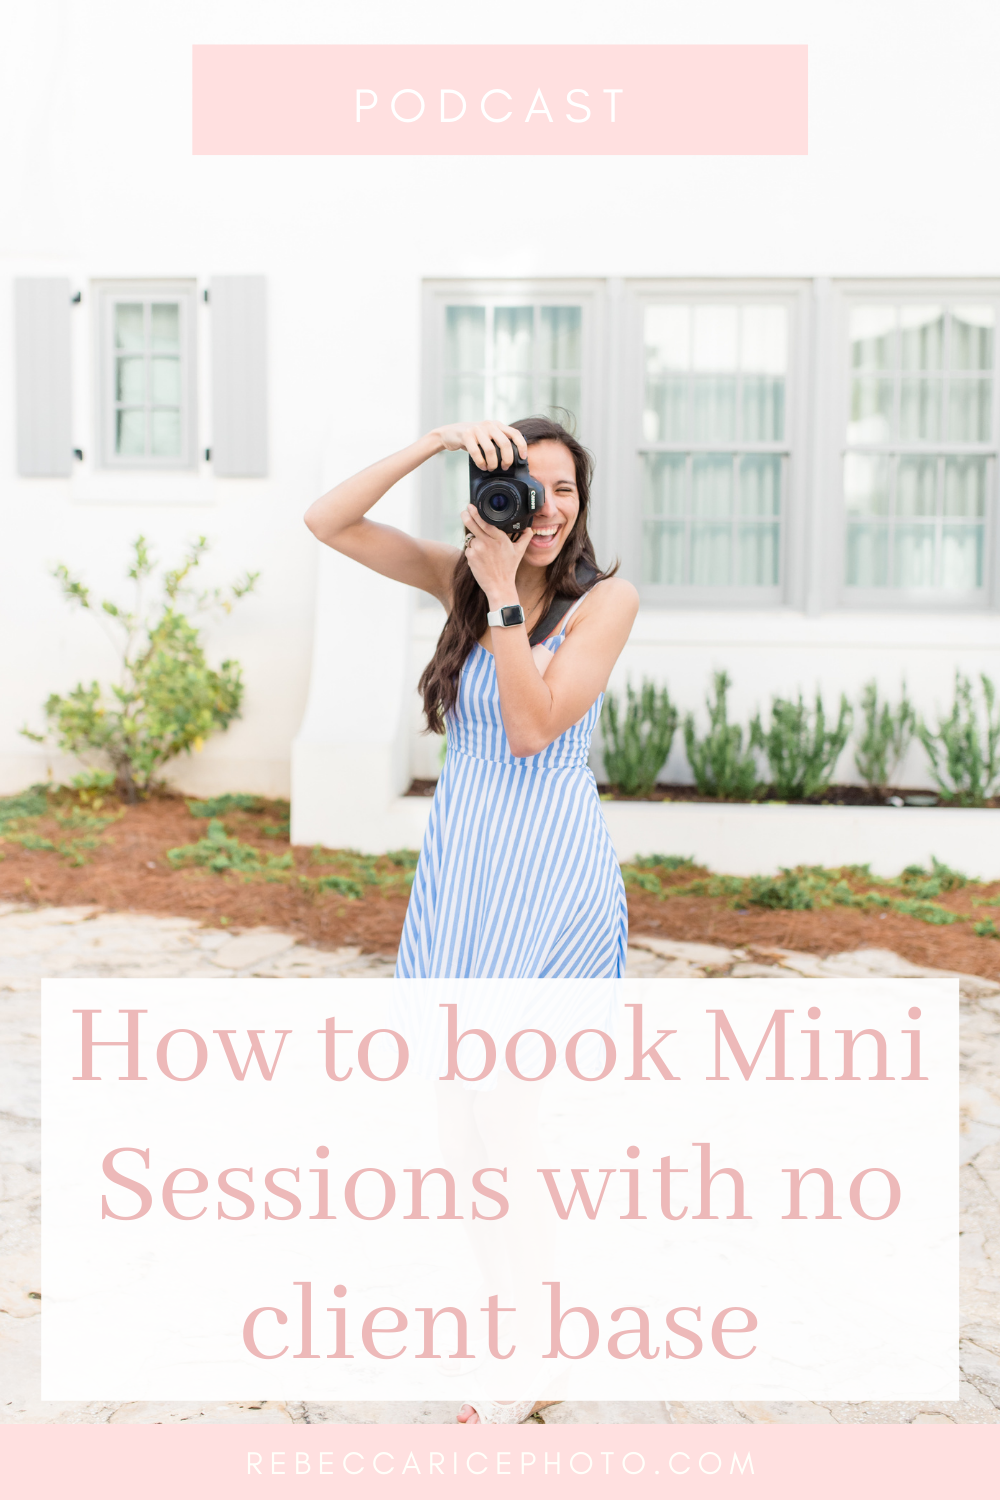 Business Journey Podcast: how to book mini-sessions with no client base